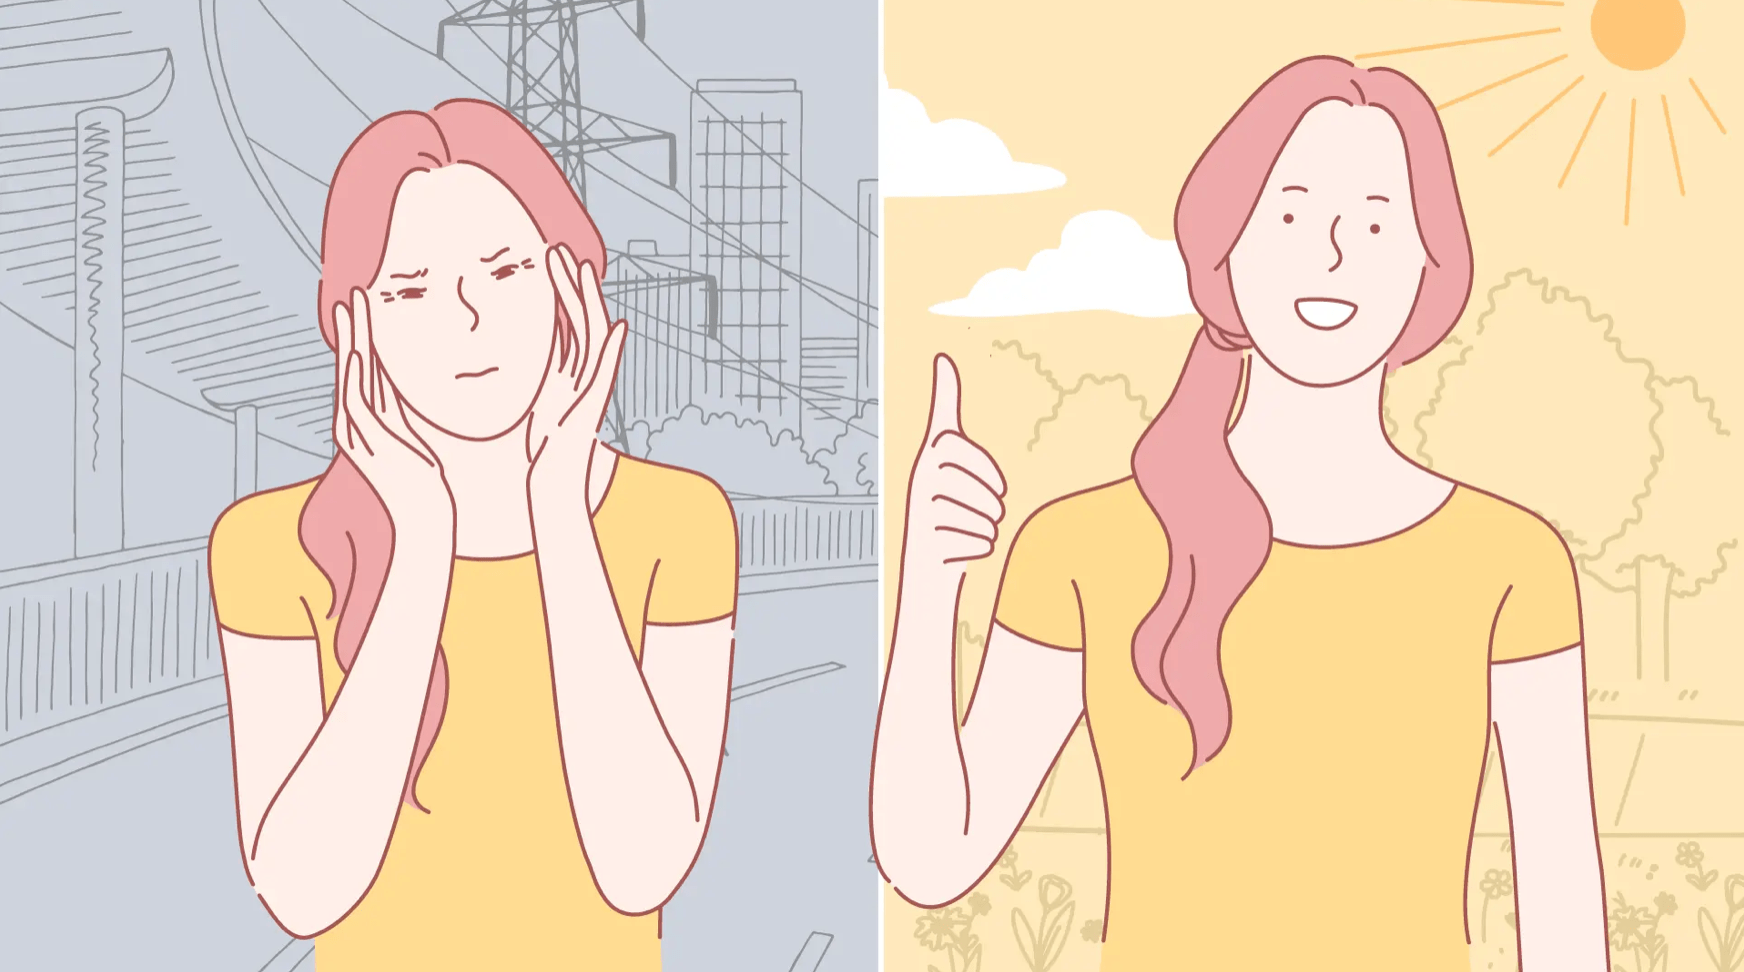 Illustration of a women showing two different emotions